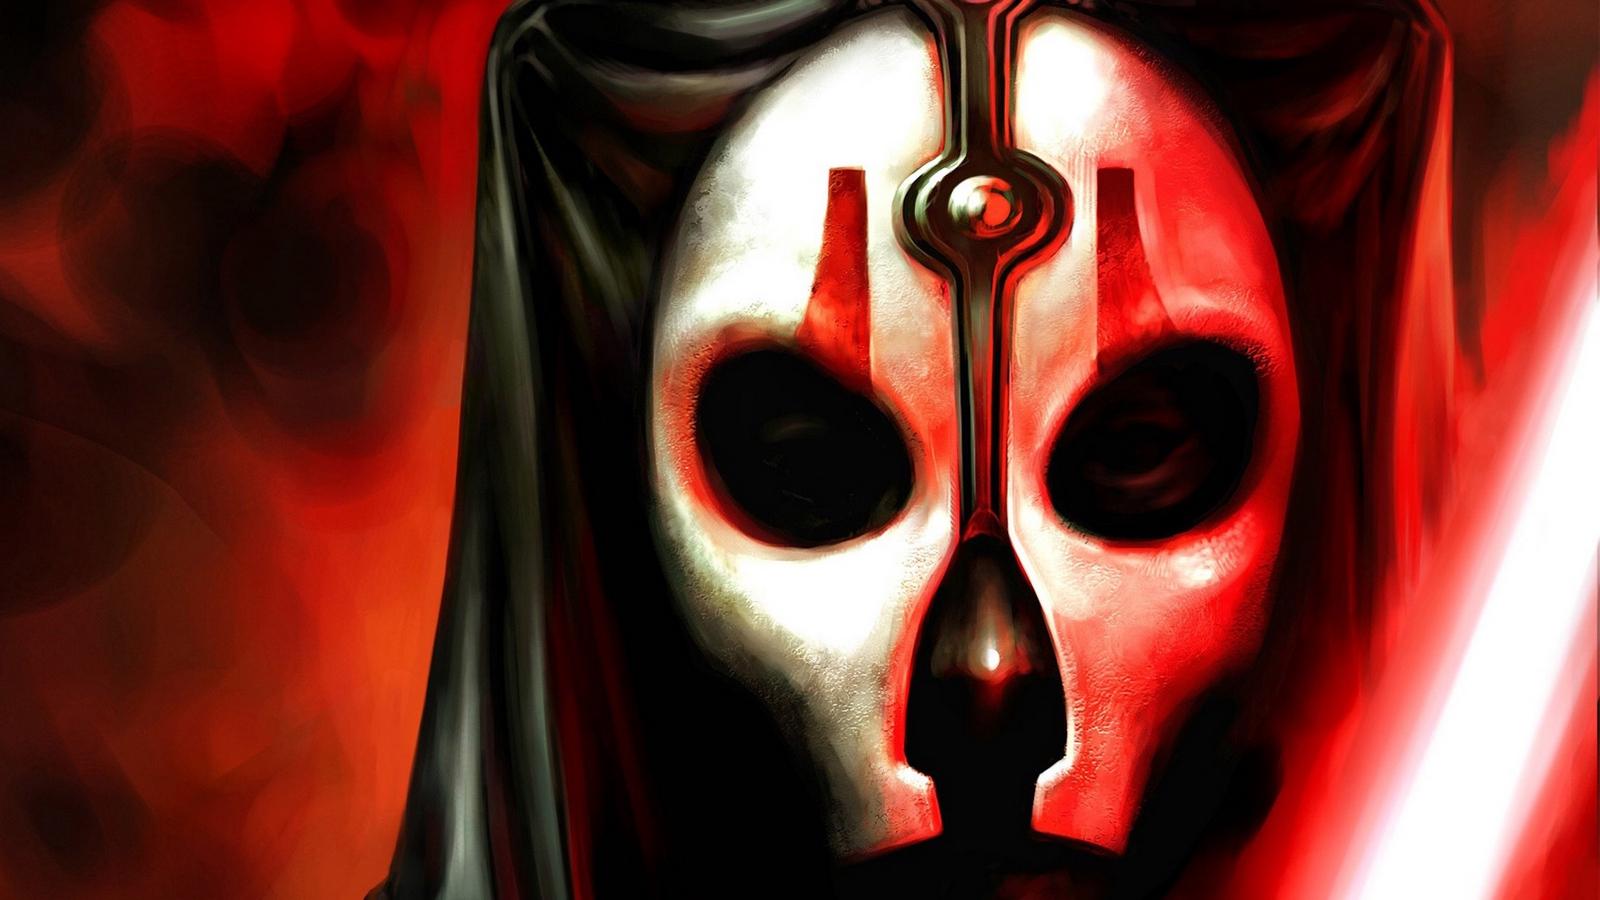 Download wallpaper 1600x900 star wars, knights of the old republic